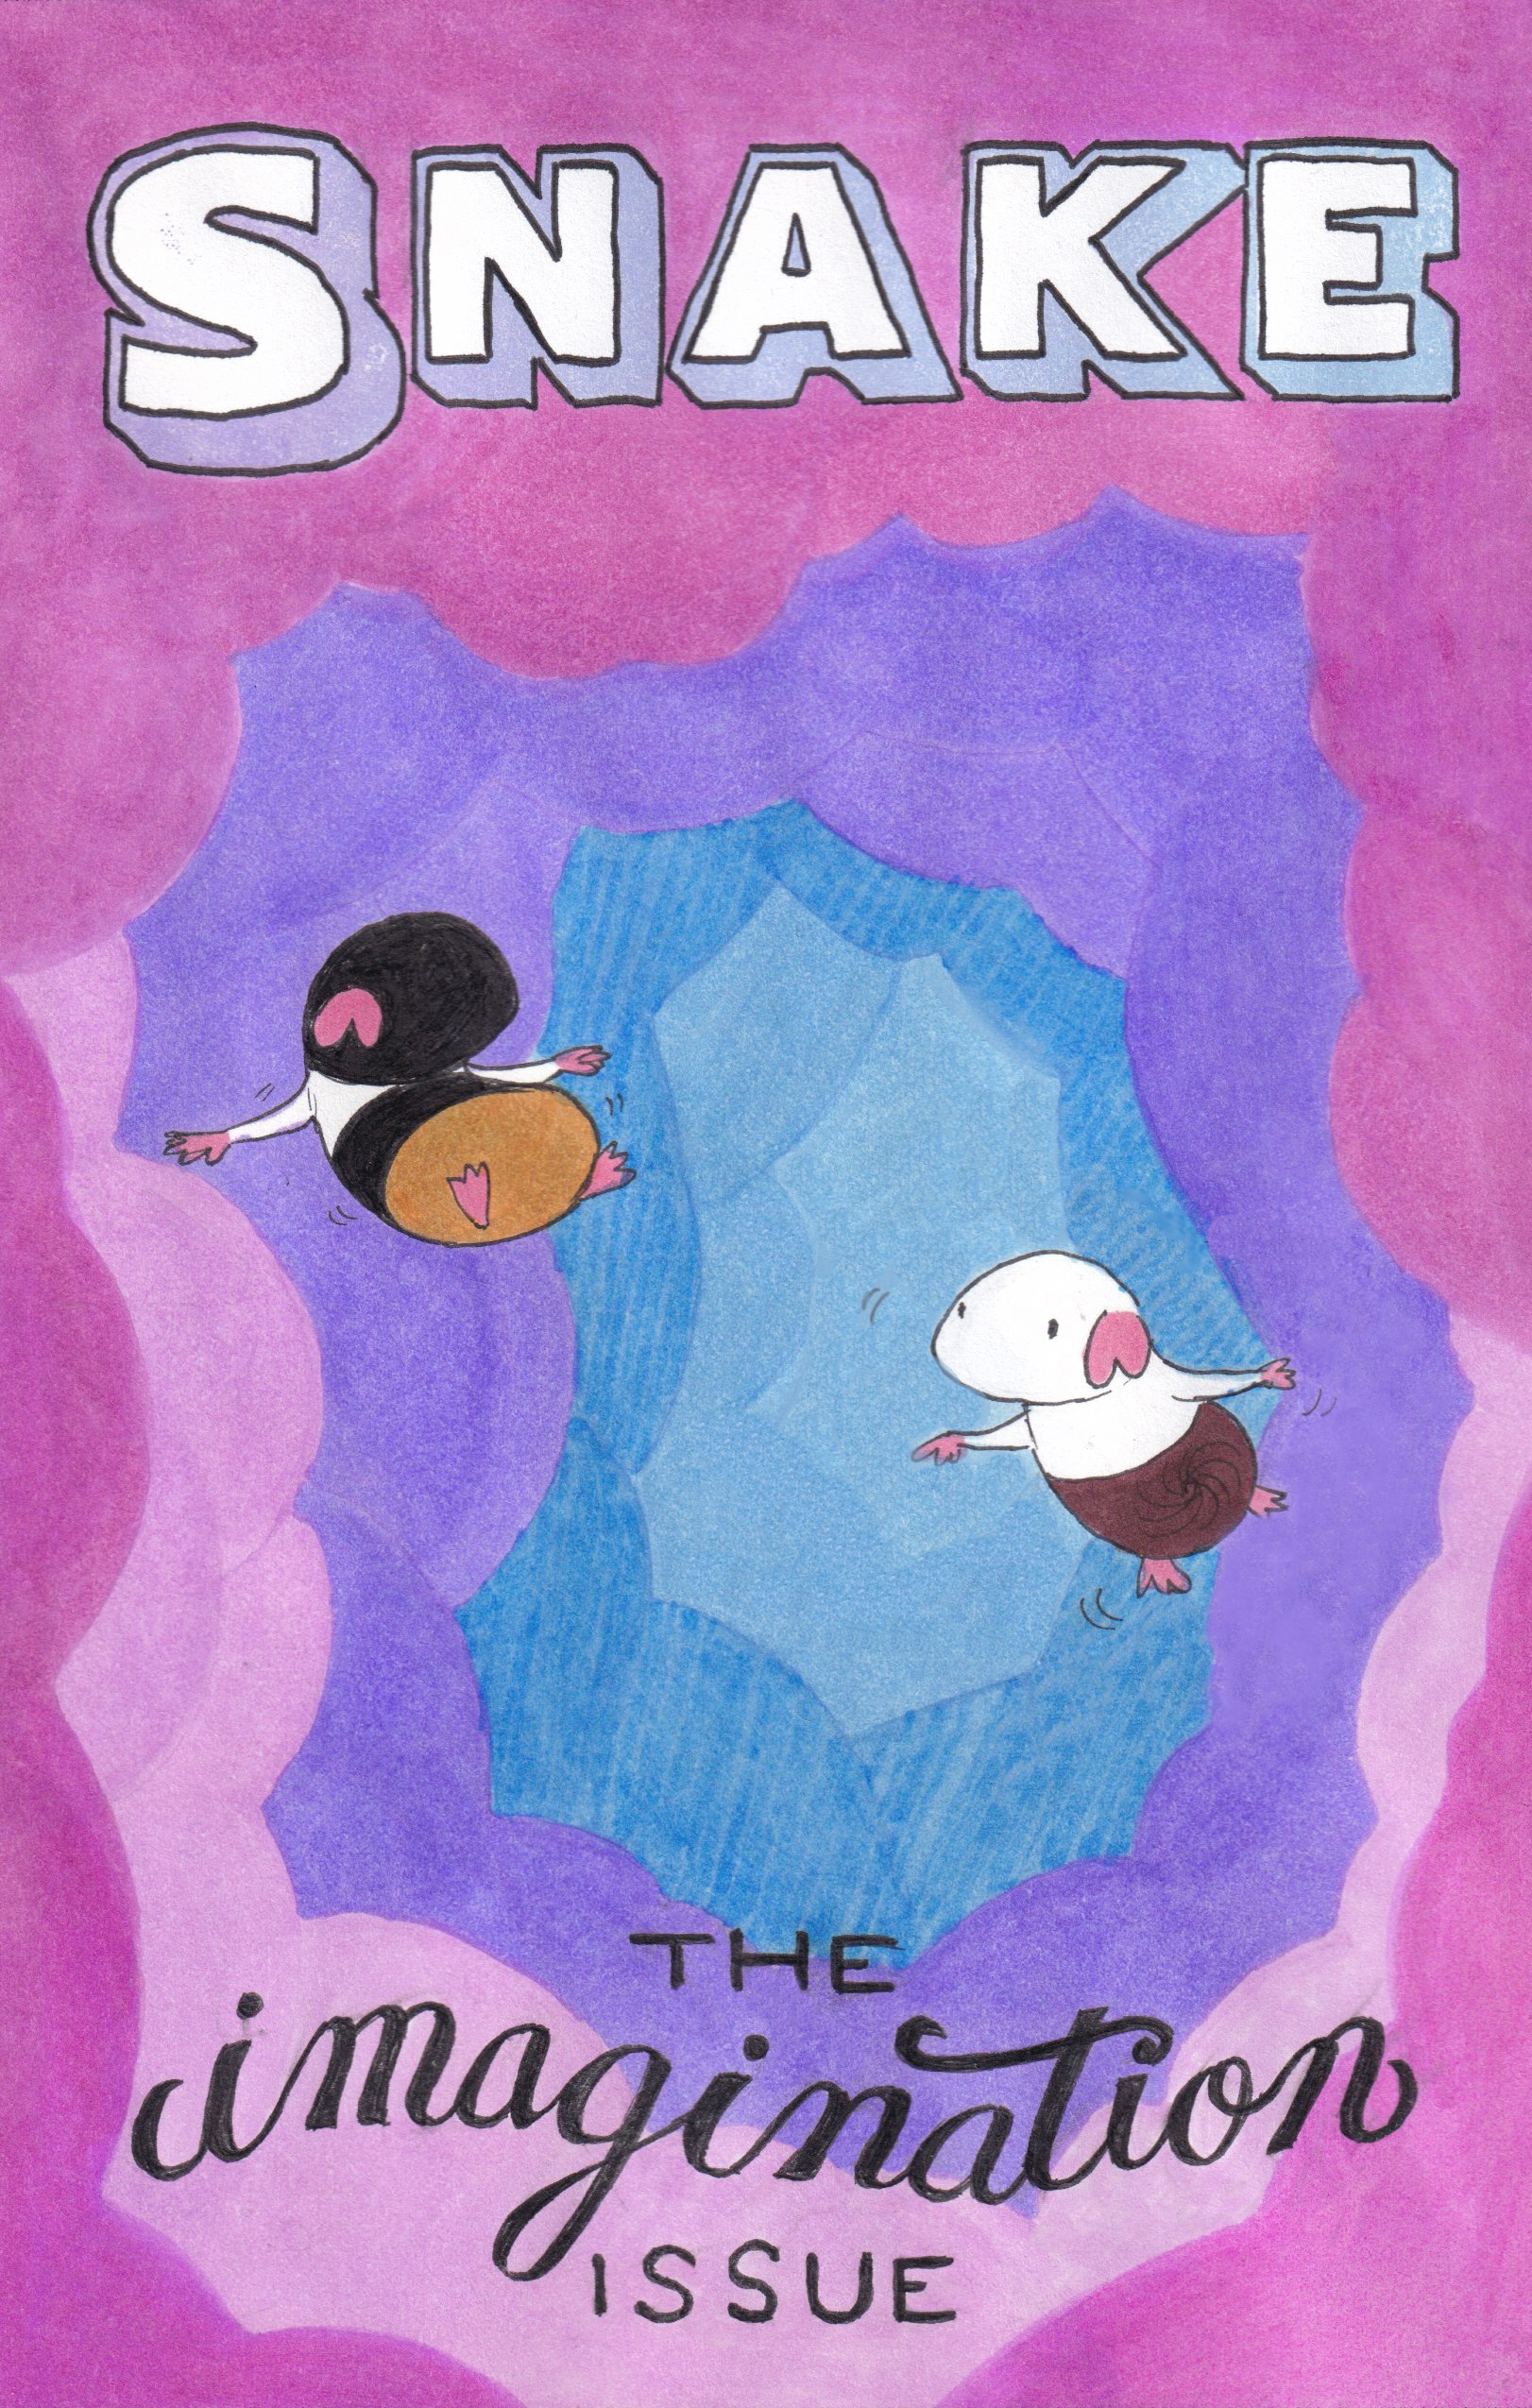 The cover of the Imagination Issue, showing two guinea pigs floating in an imaginary cloudy realm. The clouds are colored in different shades of pinks, purples, and blues. At the top of the page is the word 